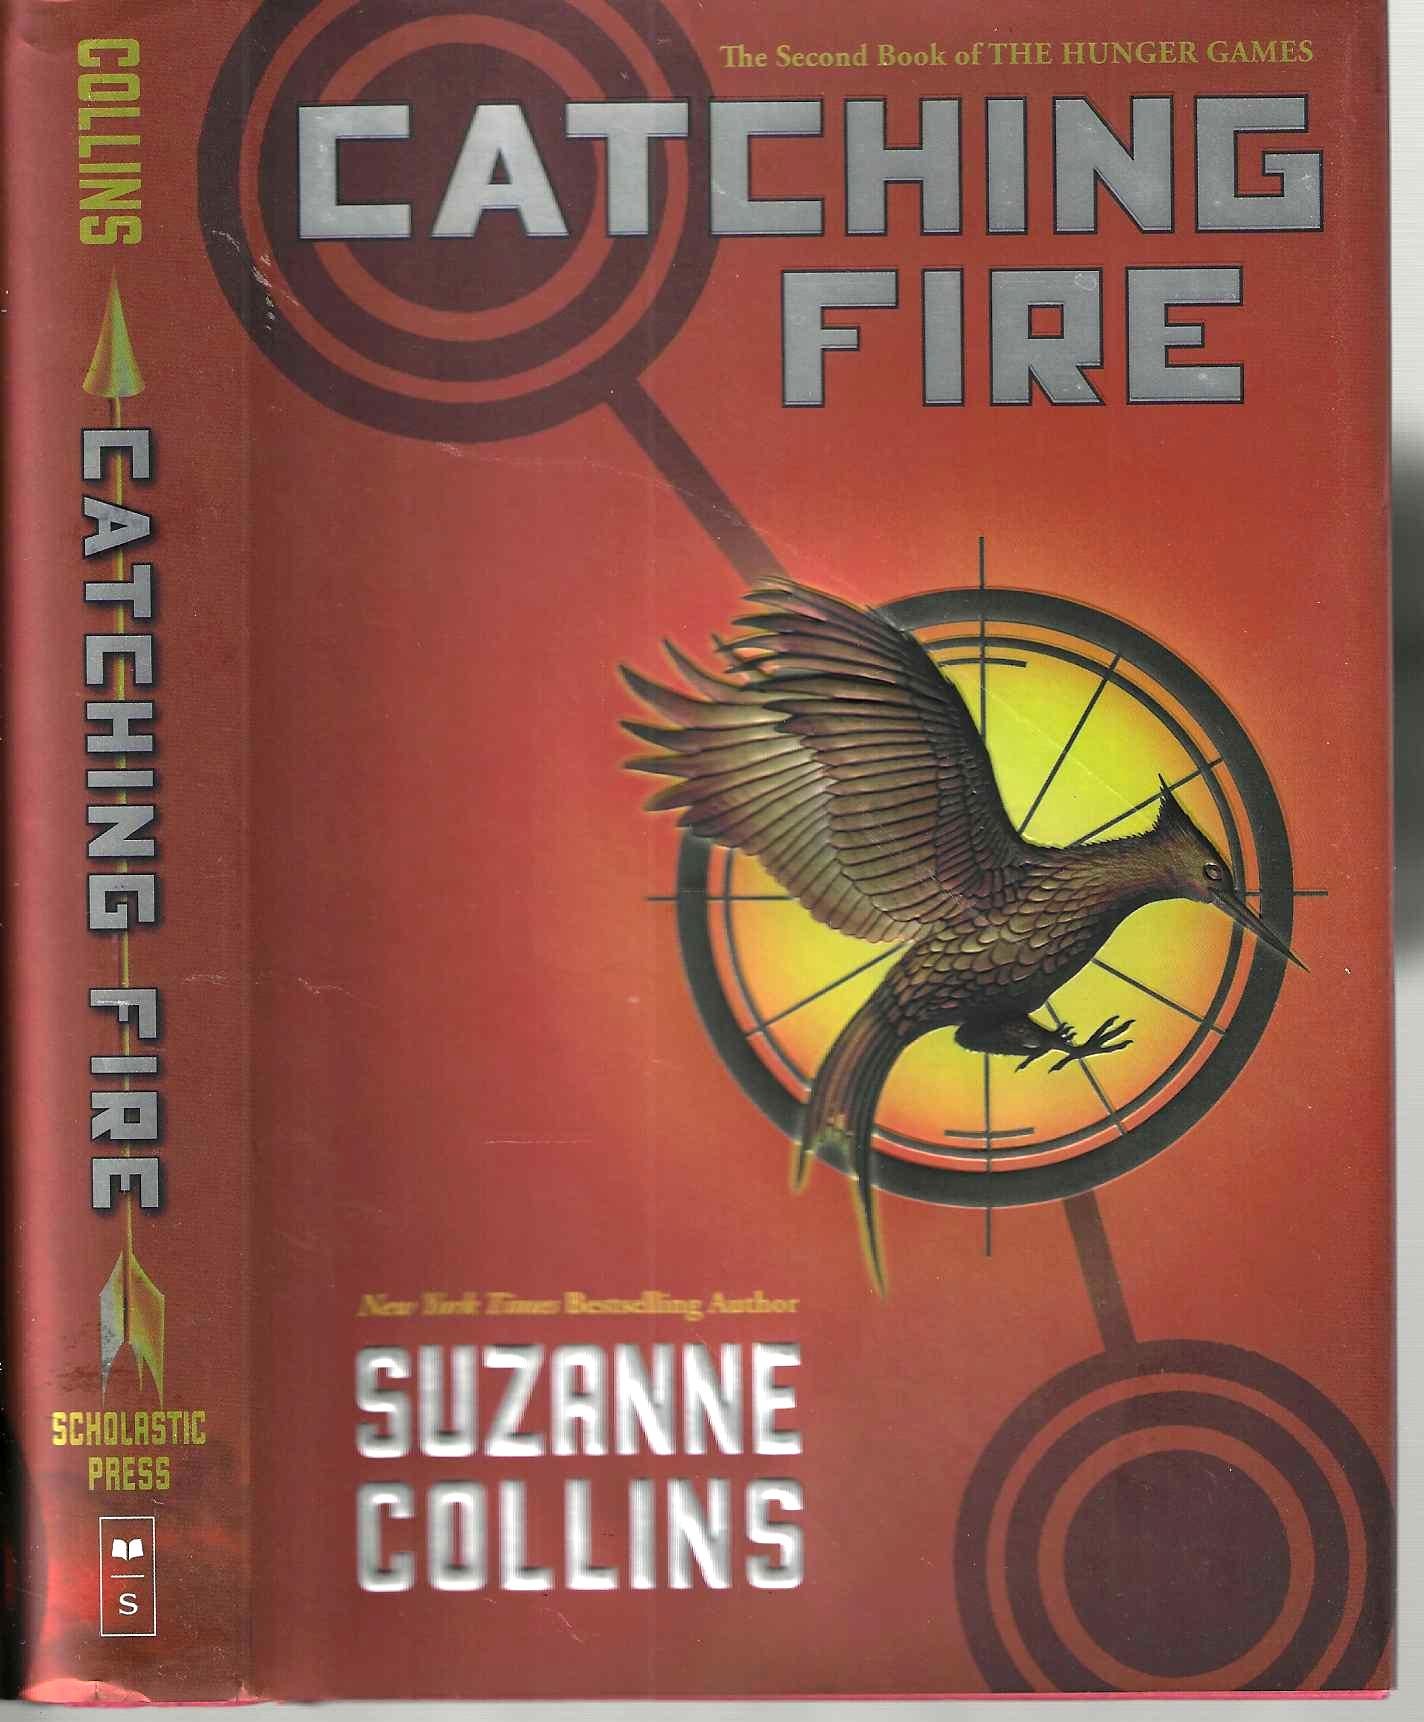 Library of Clean Reads: The Hunger Games by Suzanne Collins